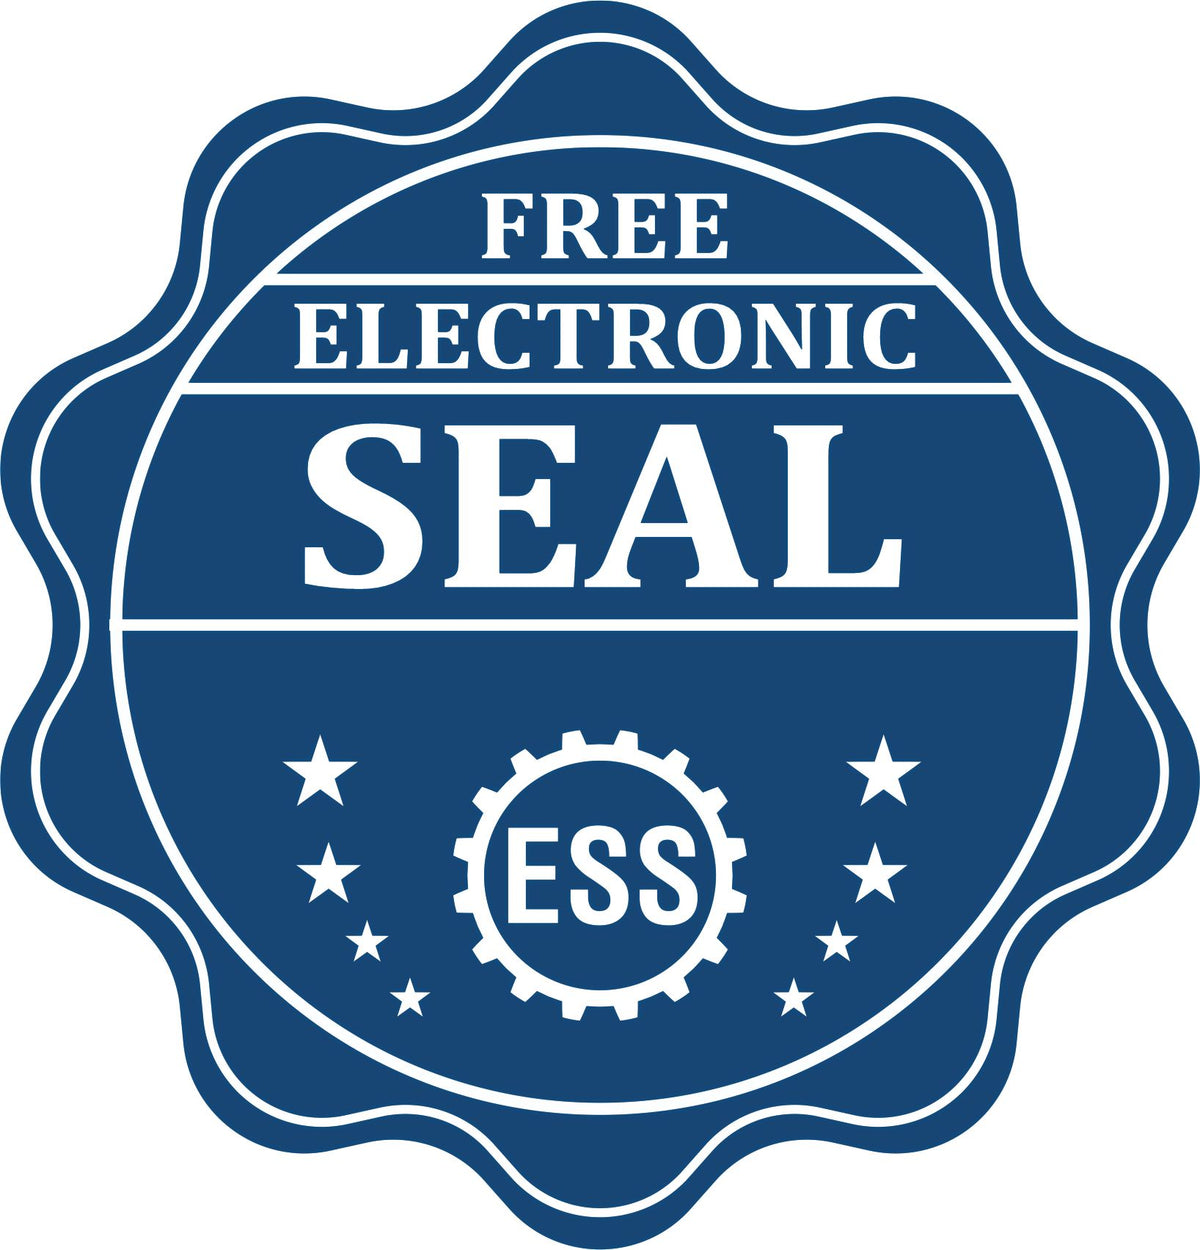 A badge showing a free electronic seal for the Slim Pre-Inked North Carolina Professional Engineer Seal Stamp with stars and the ESS gear on the emblem.